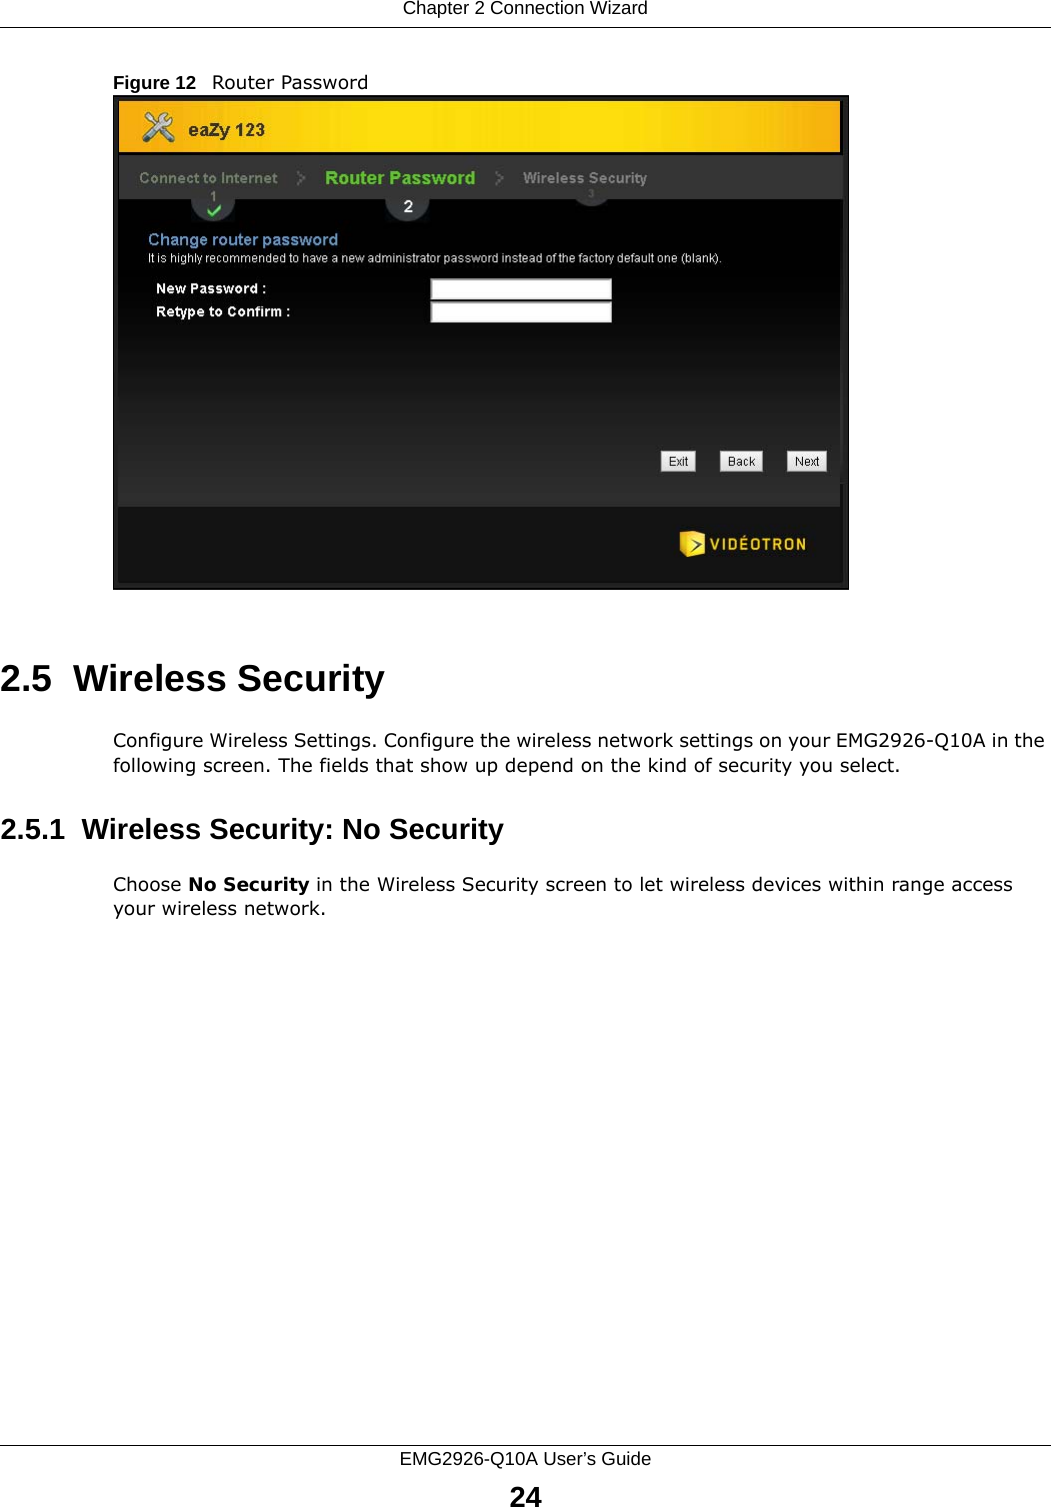 Chapter 2 Connection WizardEMG2926-Q10A User’s Guide24Figure 12   Router Password 2.5  Wireless SecurityConfigure Wireless Settings. Configure the wireless network settings on your EMG2926-Q10A in the following screen. The fields that show up depend on the kind of security you select.2.5.1  Wireless Security: No SecurityChoose No Security in the Wireless Security screen to let wireless devices within range access your wireless network.